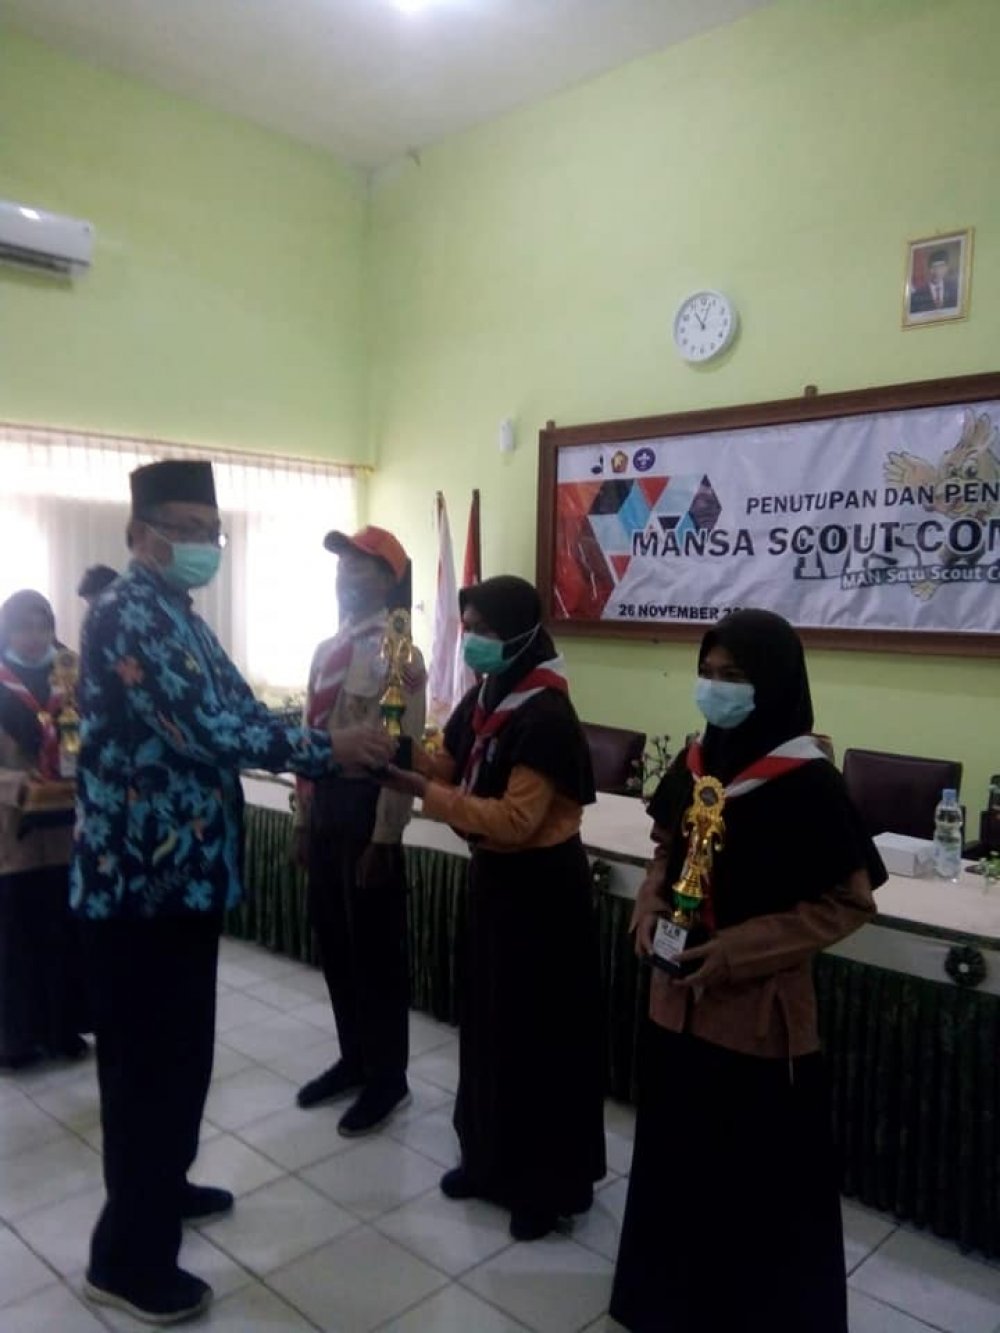 MSC (Mansa Scout Competition) tahun 2020